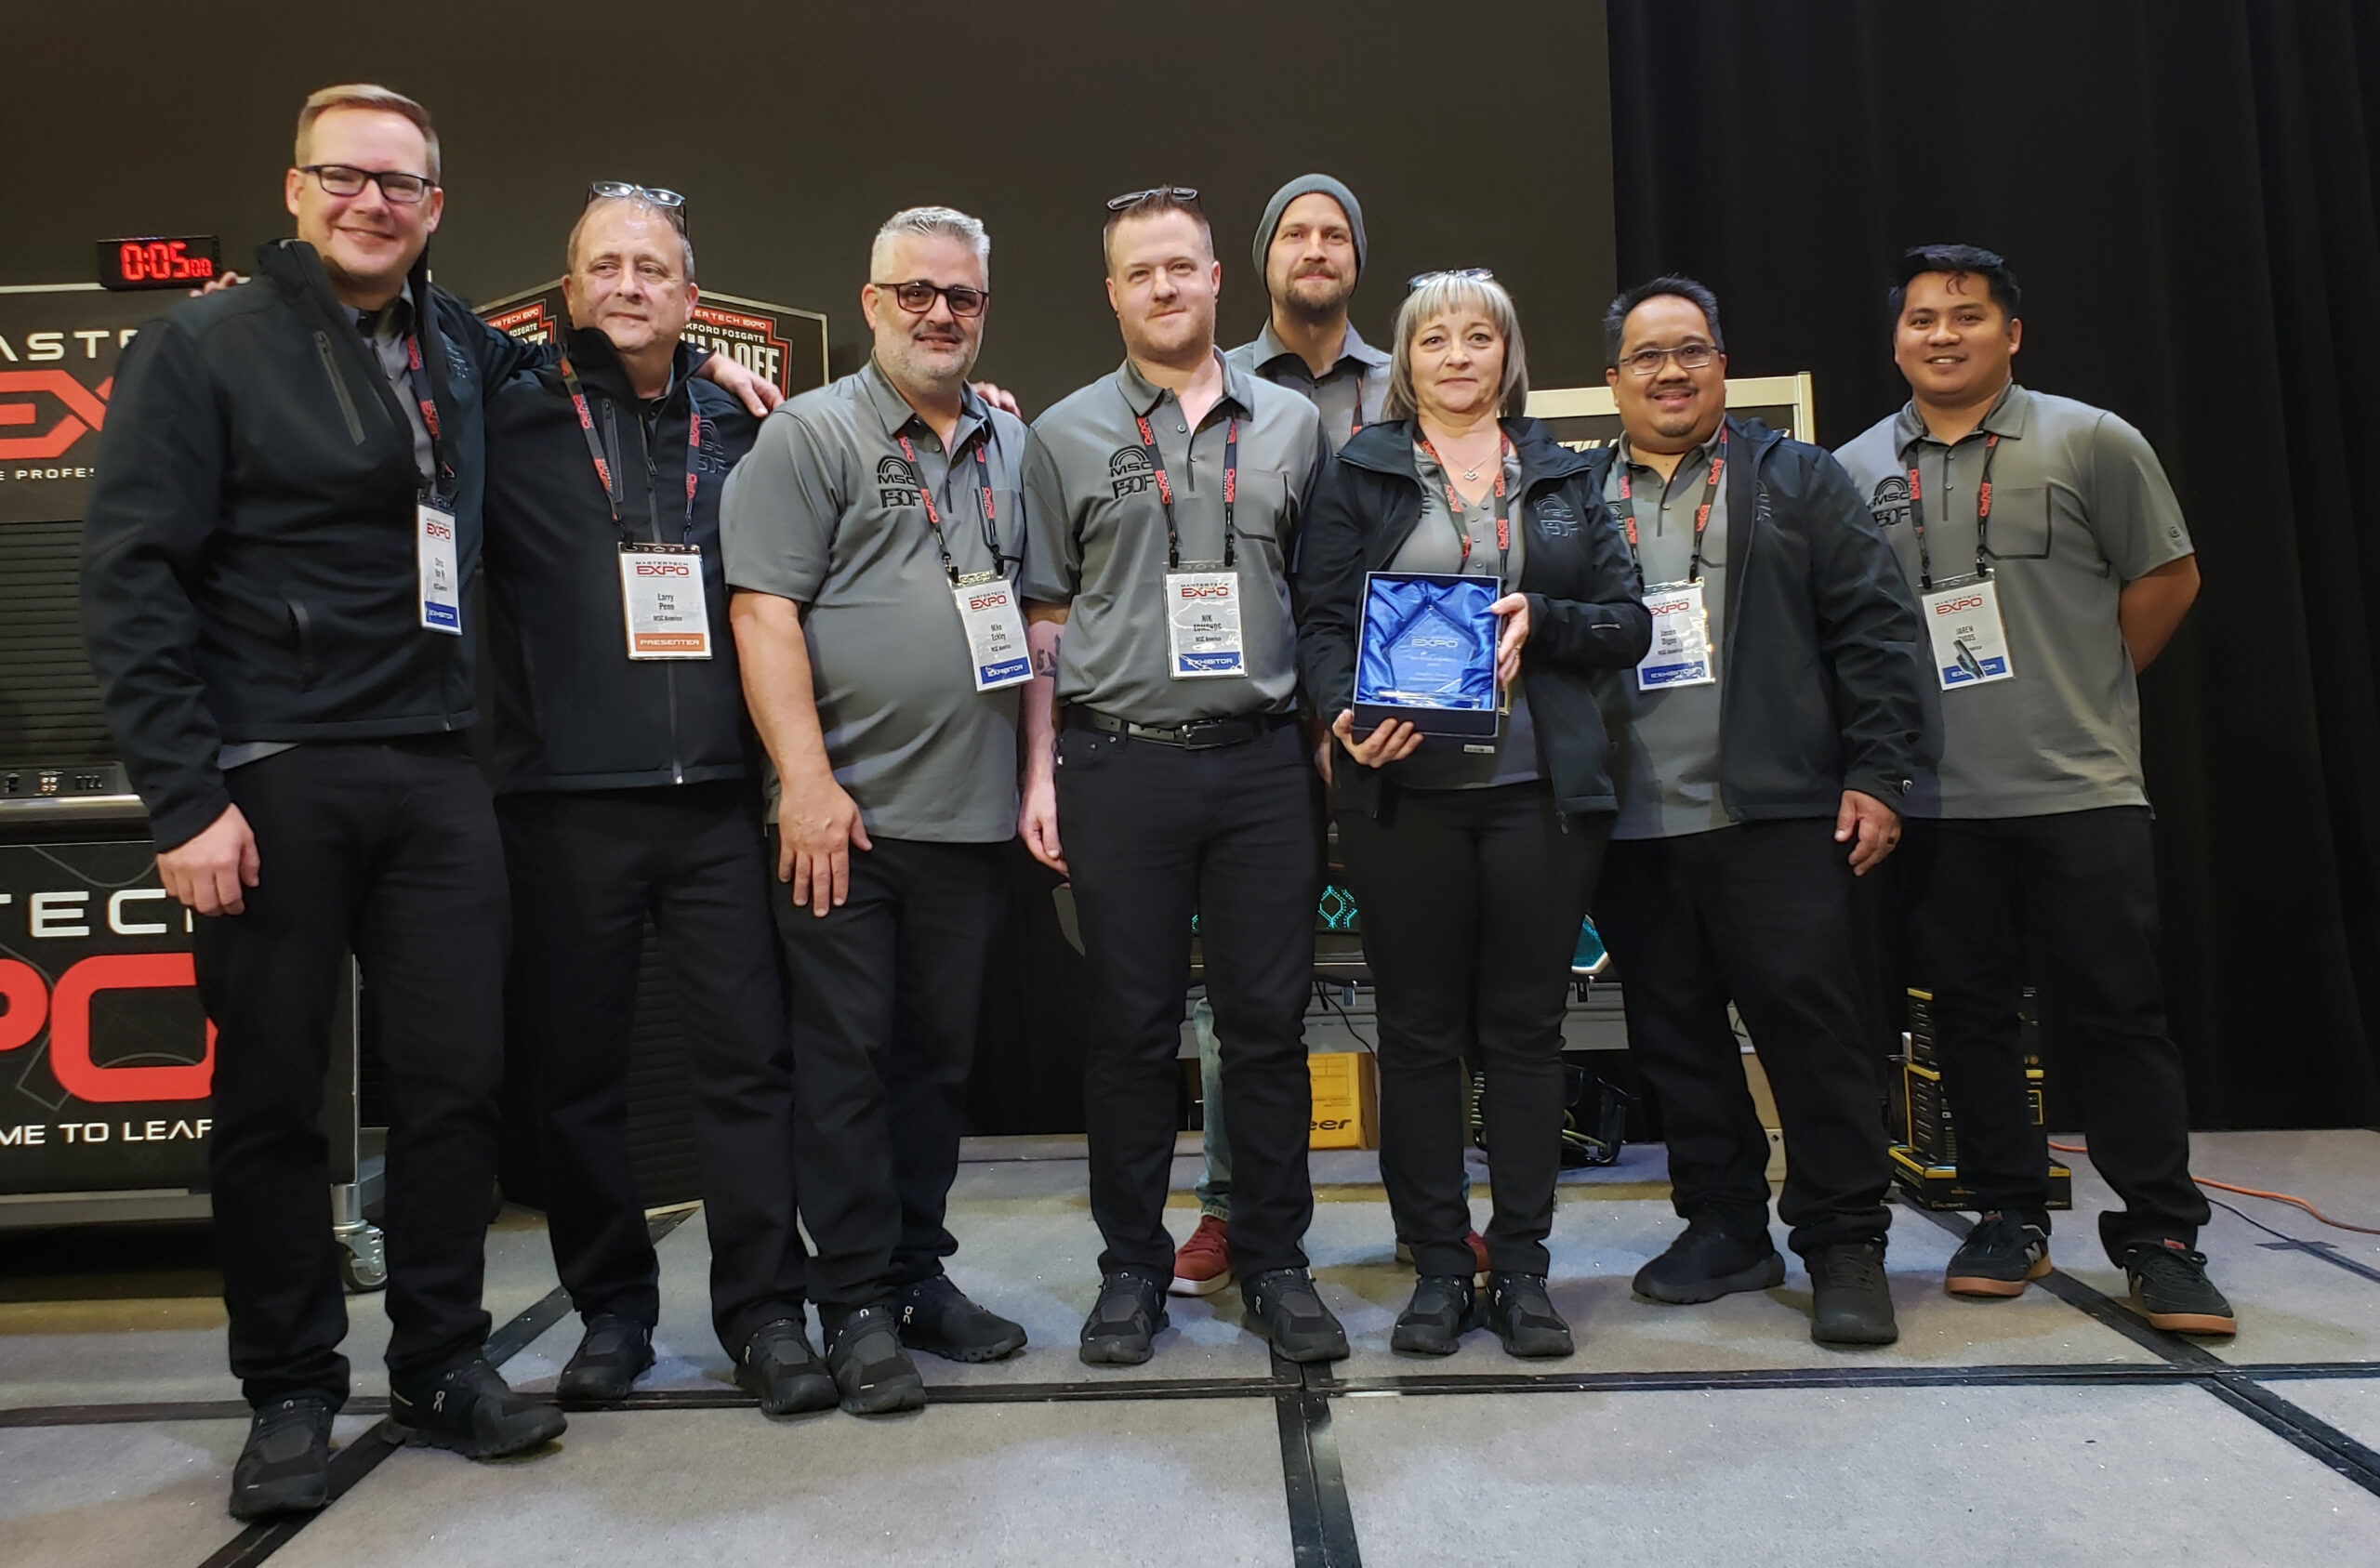 MSC Honored With Best Booth Experience at MasterTech Expo | THE SHOP